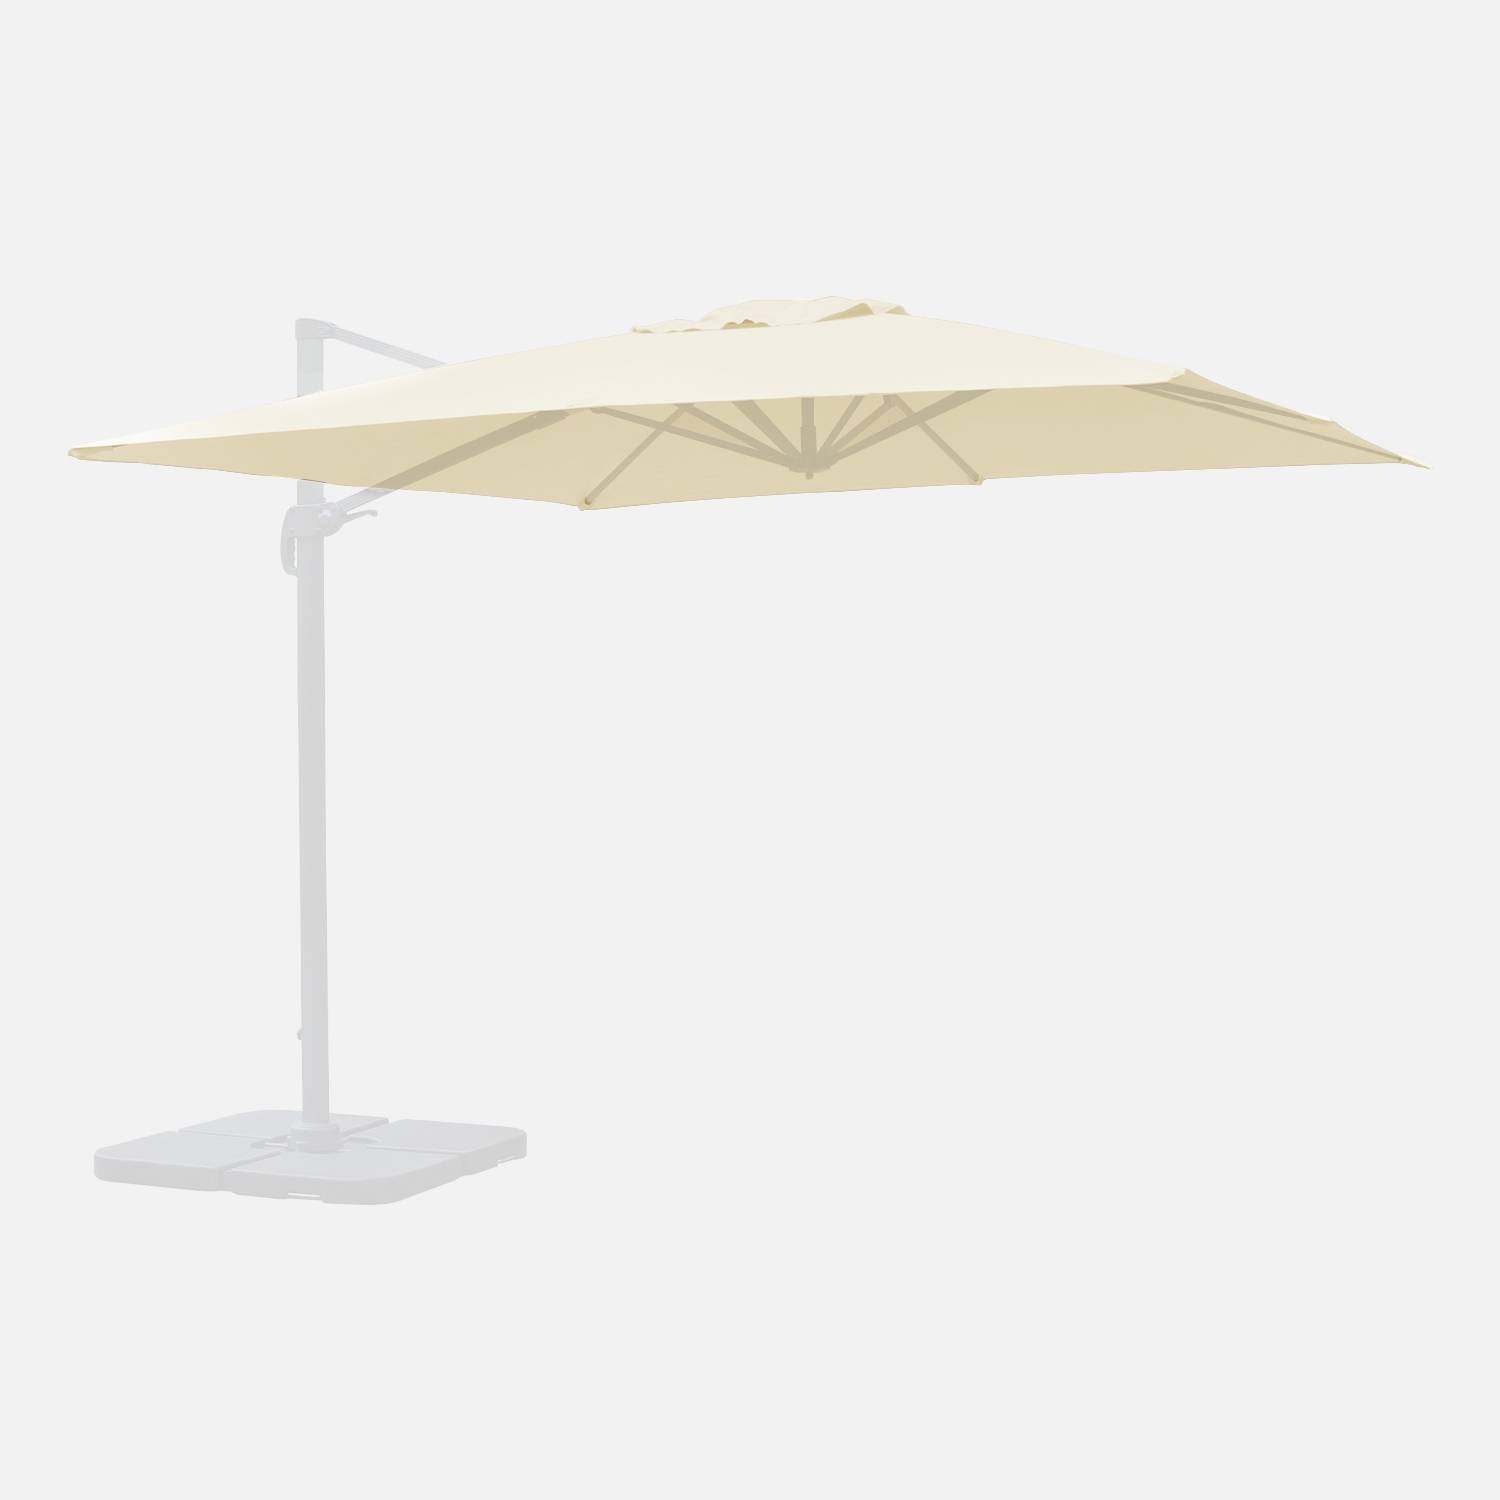 Off-white 3x3m canopy for the Falgos parasol, replacement canopy | sweeek